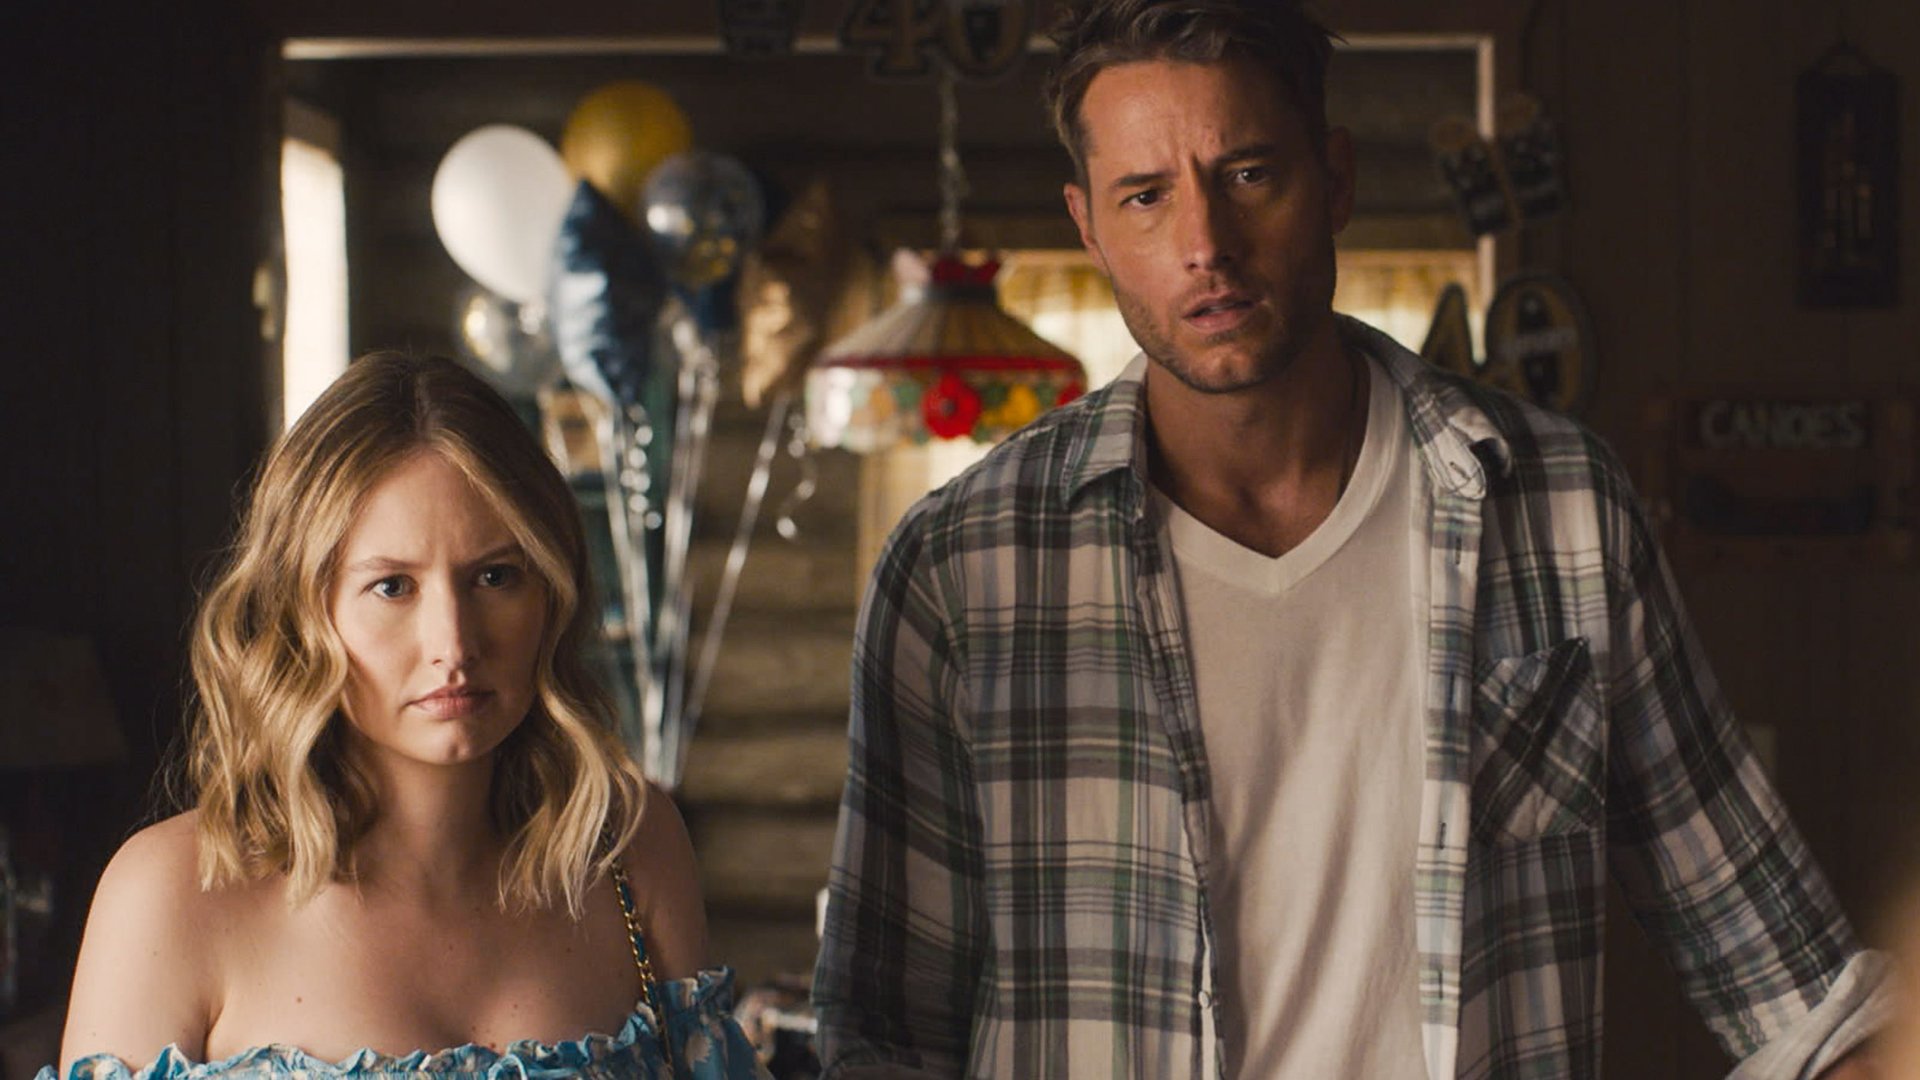 Caitlin Thompson as Madison and Justin Hartley as Kevin on 'This Is Us' Season 5 Episode 1 at the cabin